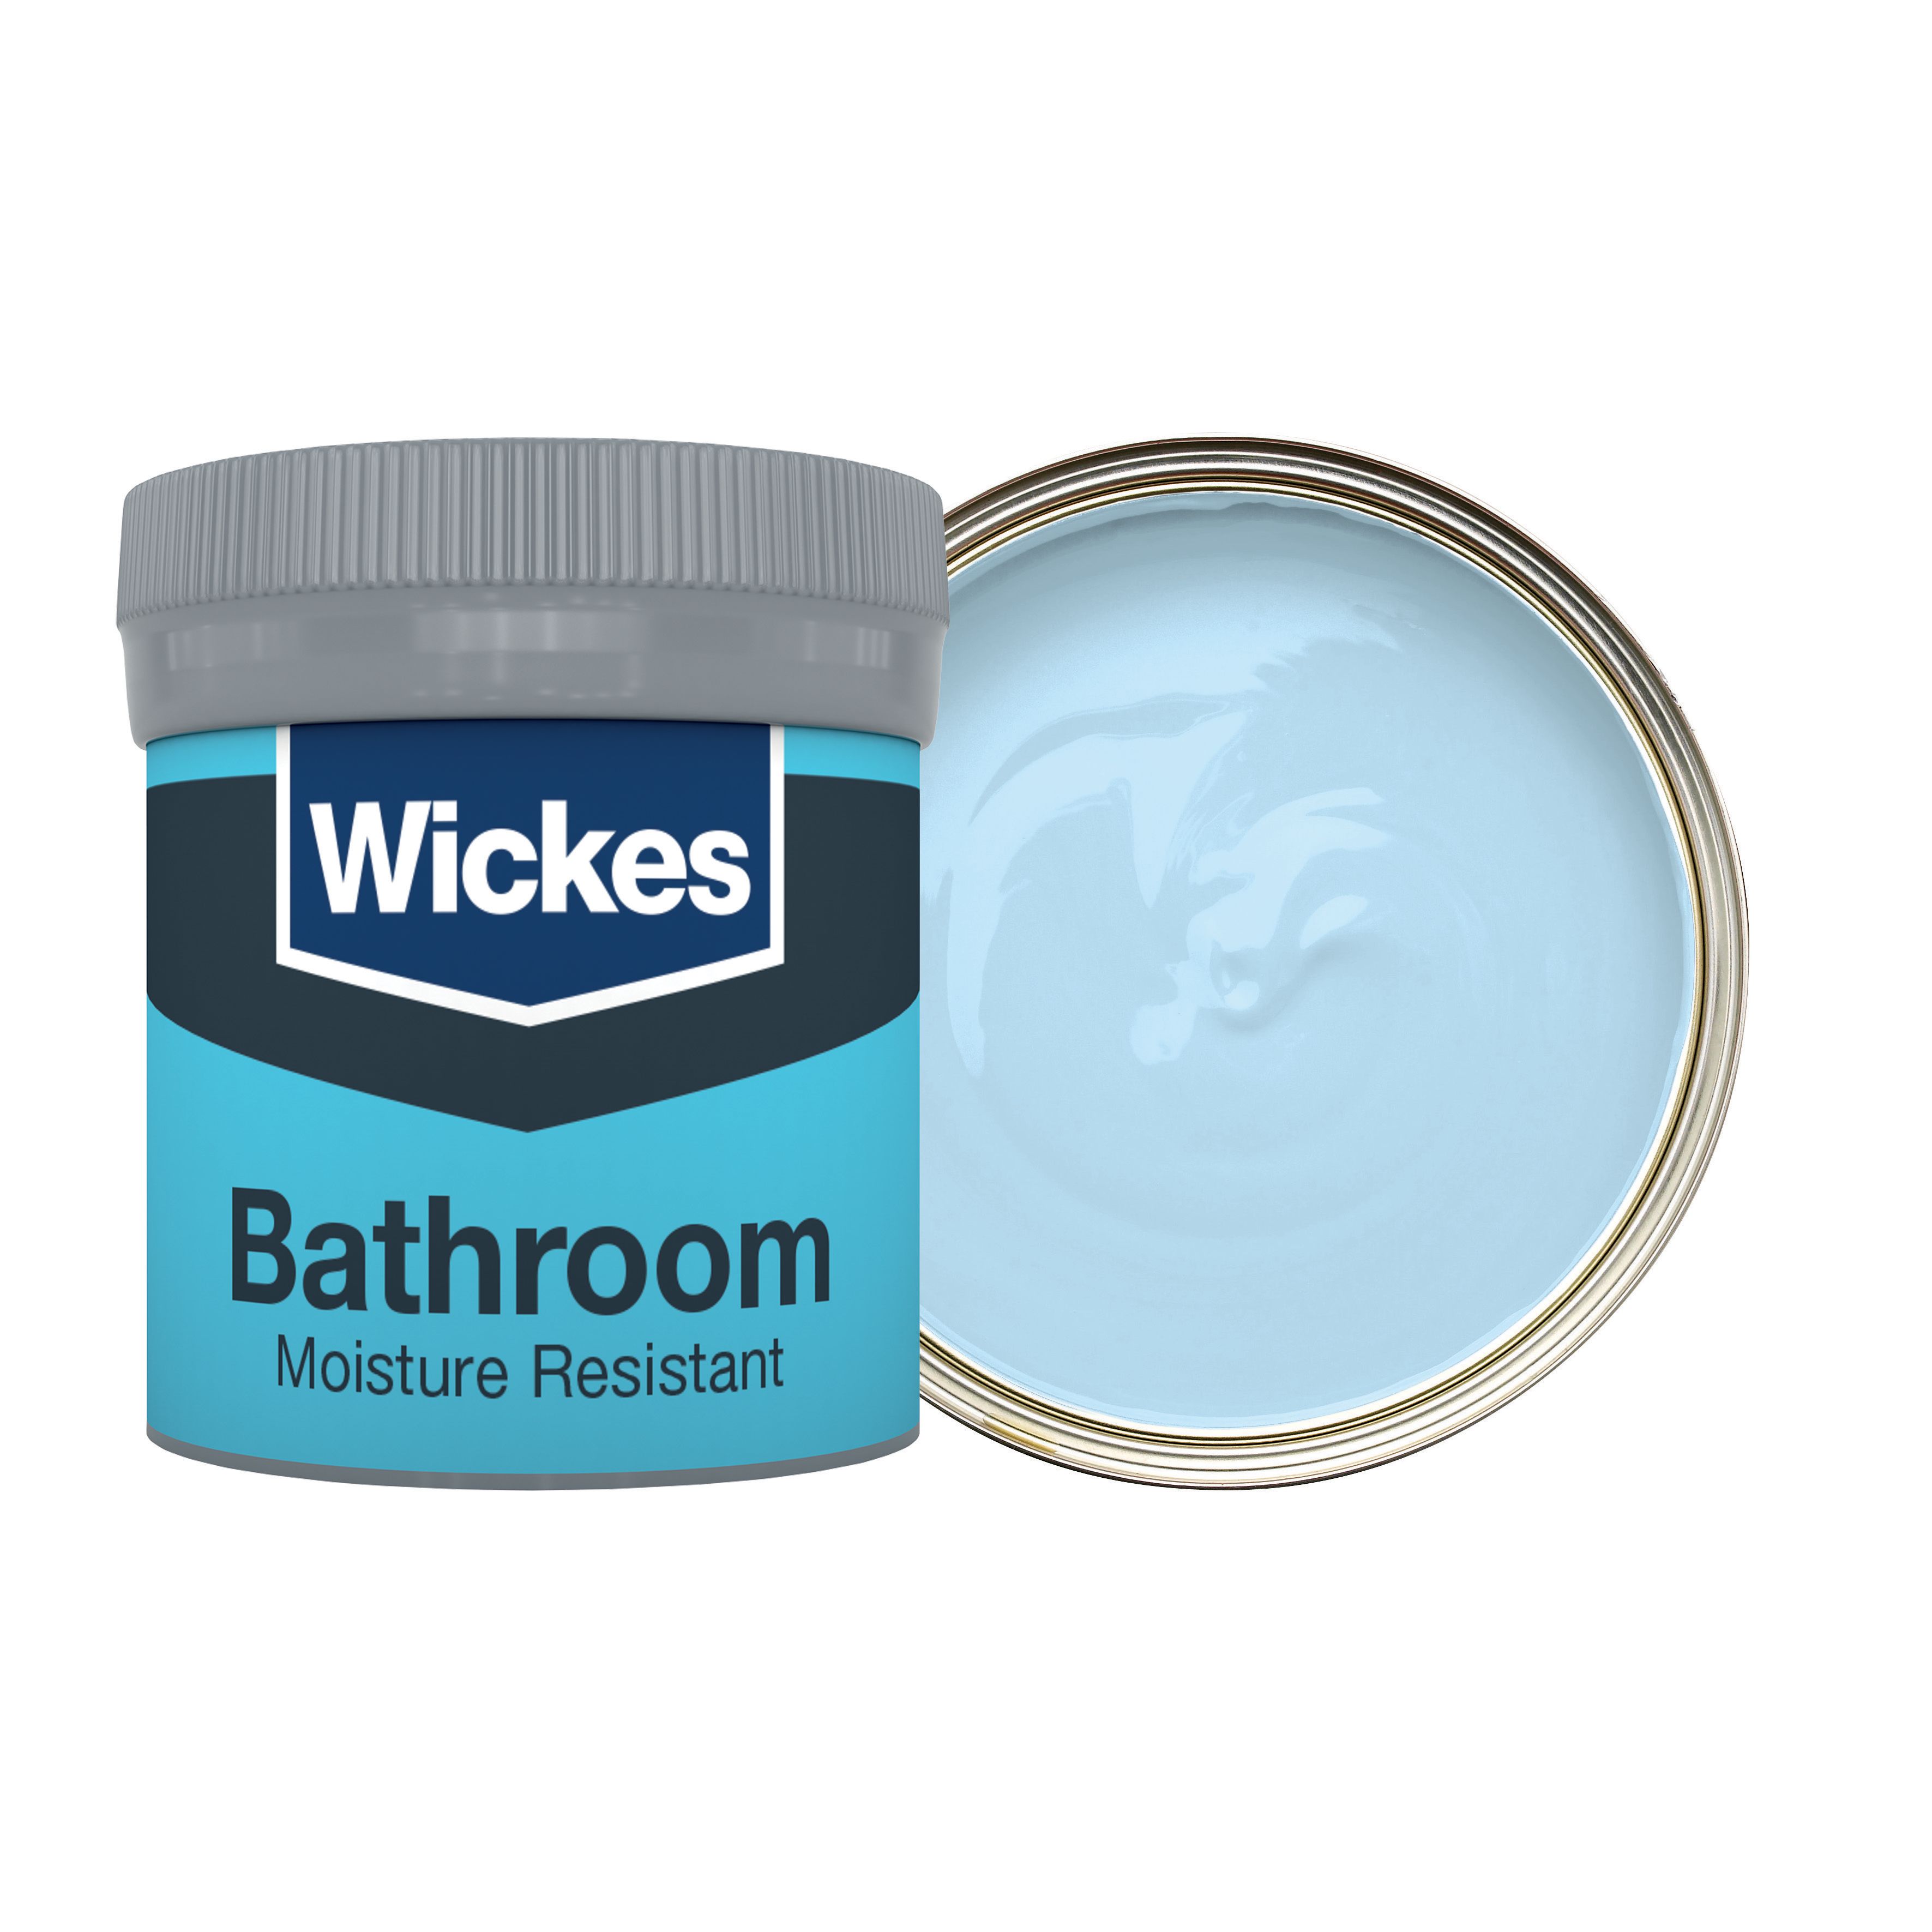 Image of Wickes Bathroom Soft Sheen Emulsion Paint Tester Pot - Sky No.910 - 50ml